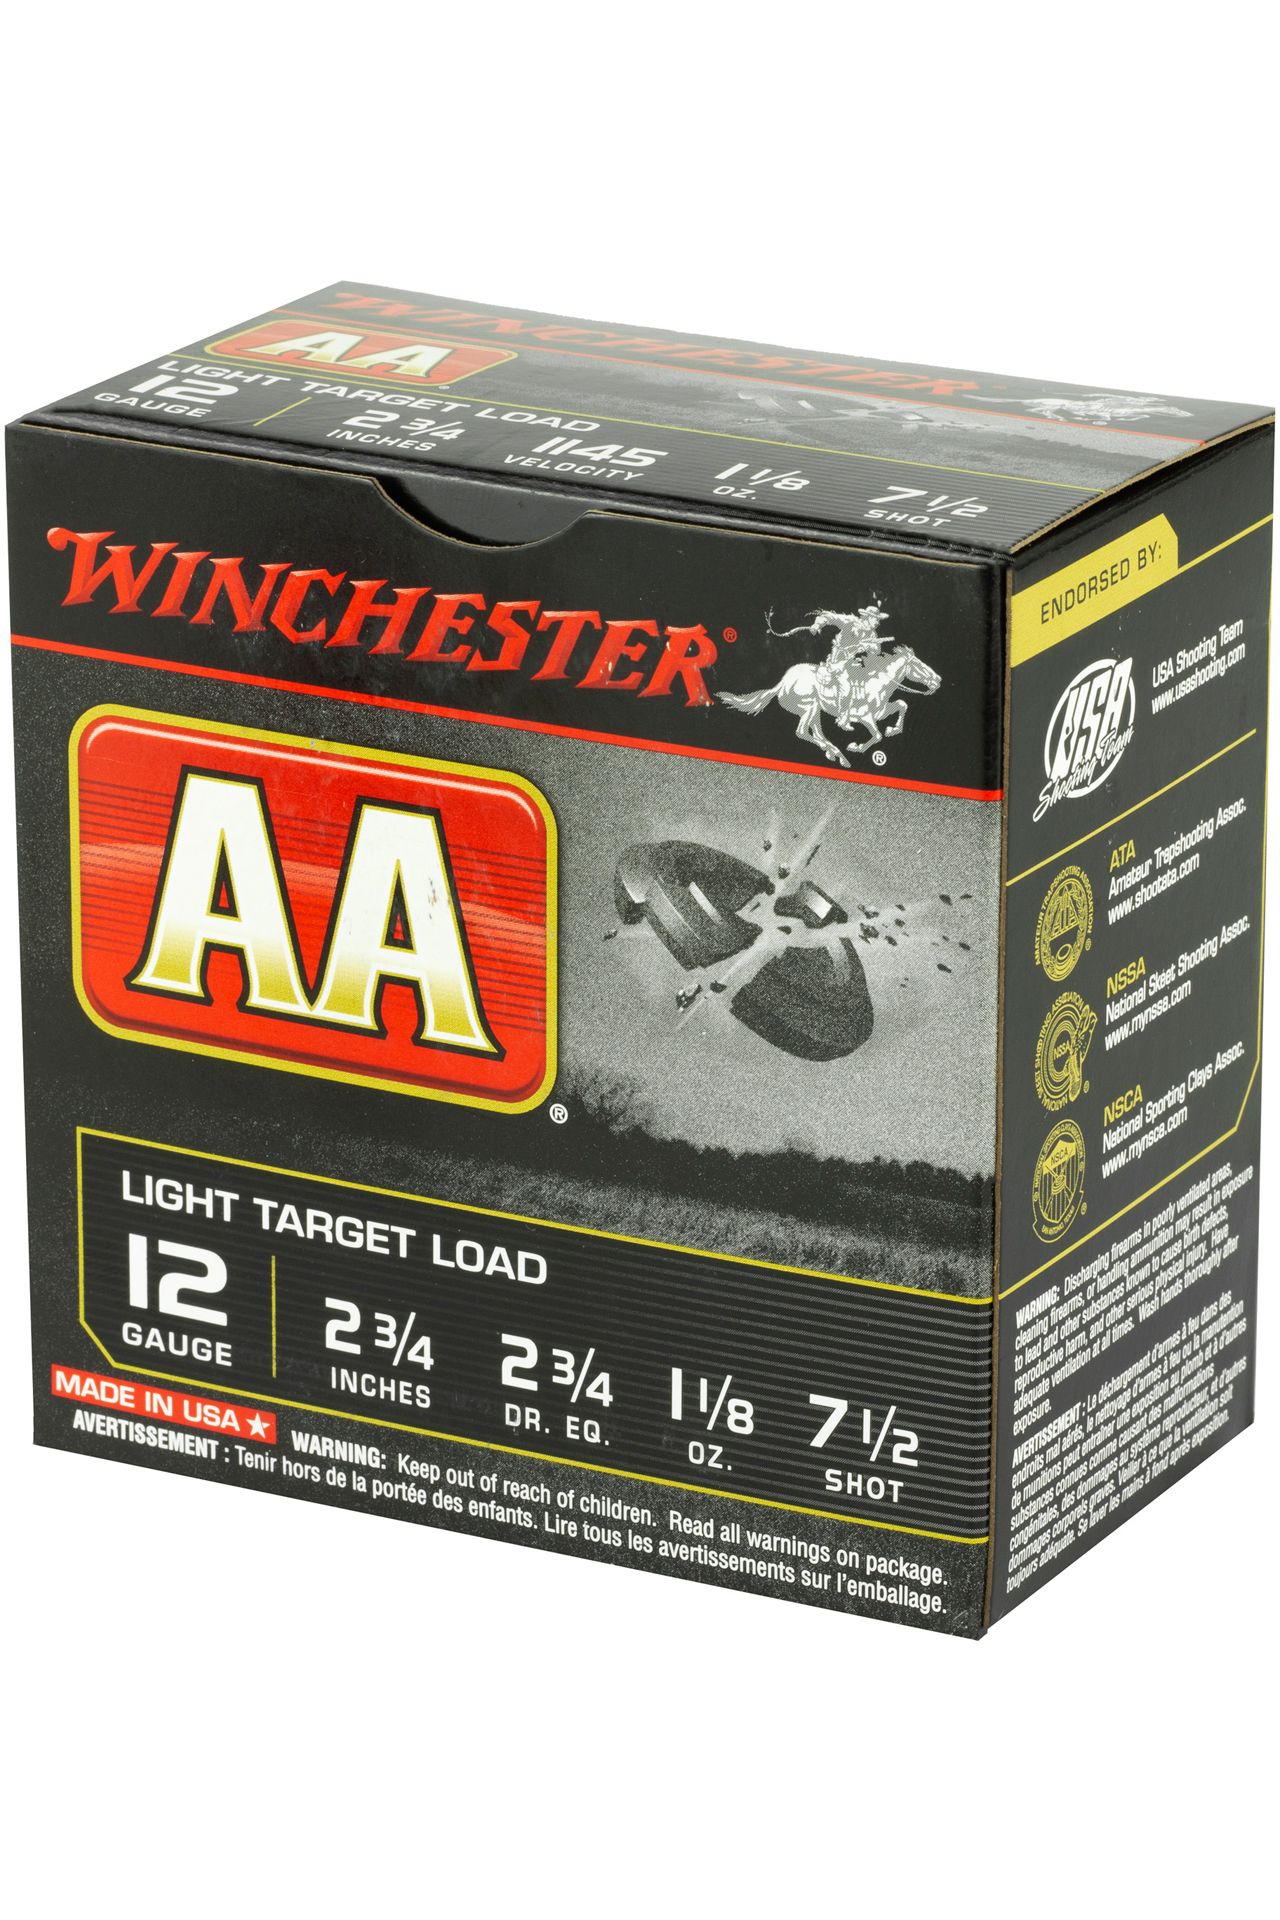 Winchester Aa Light Target Load Review